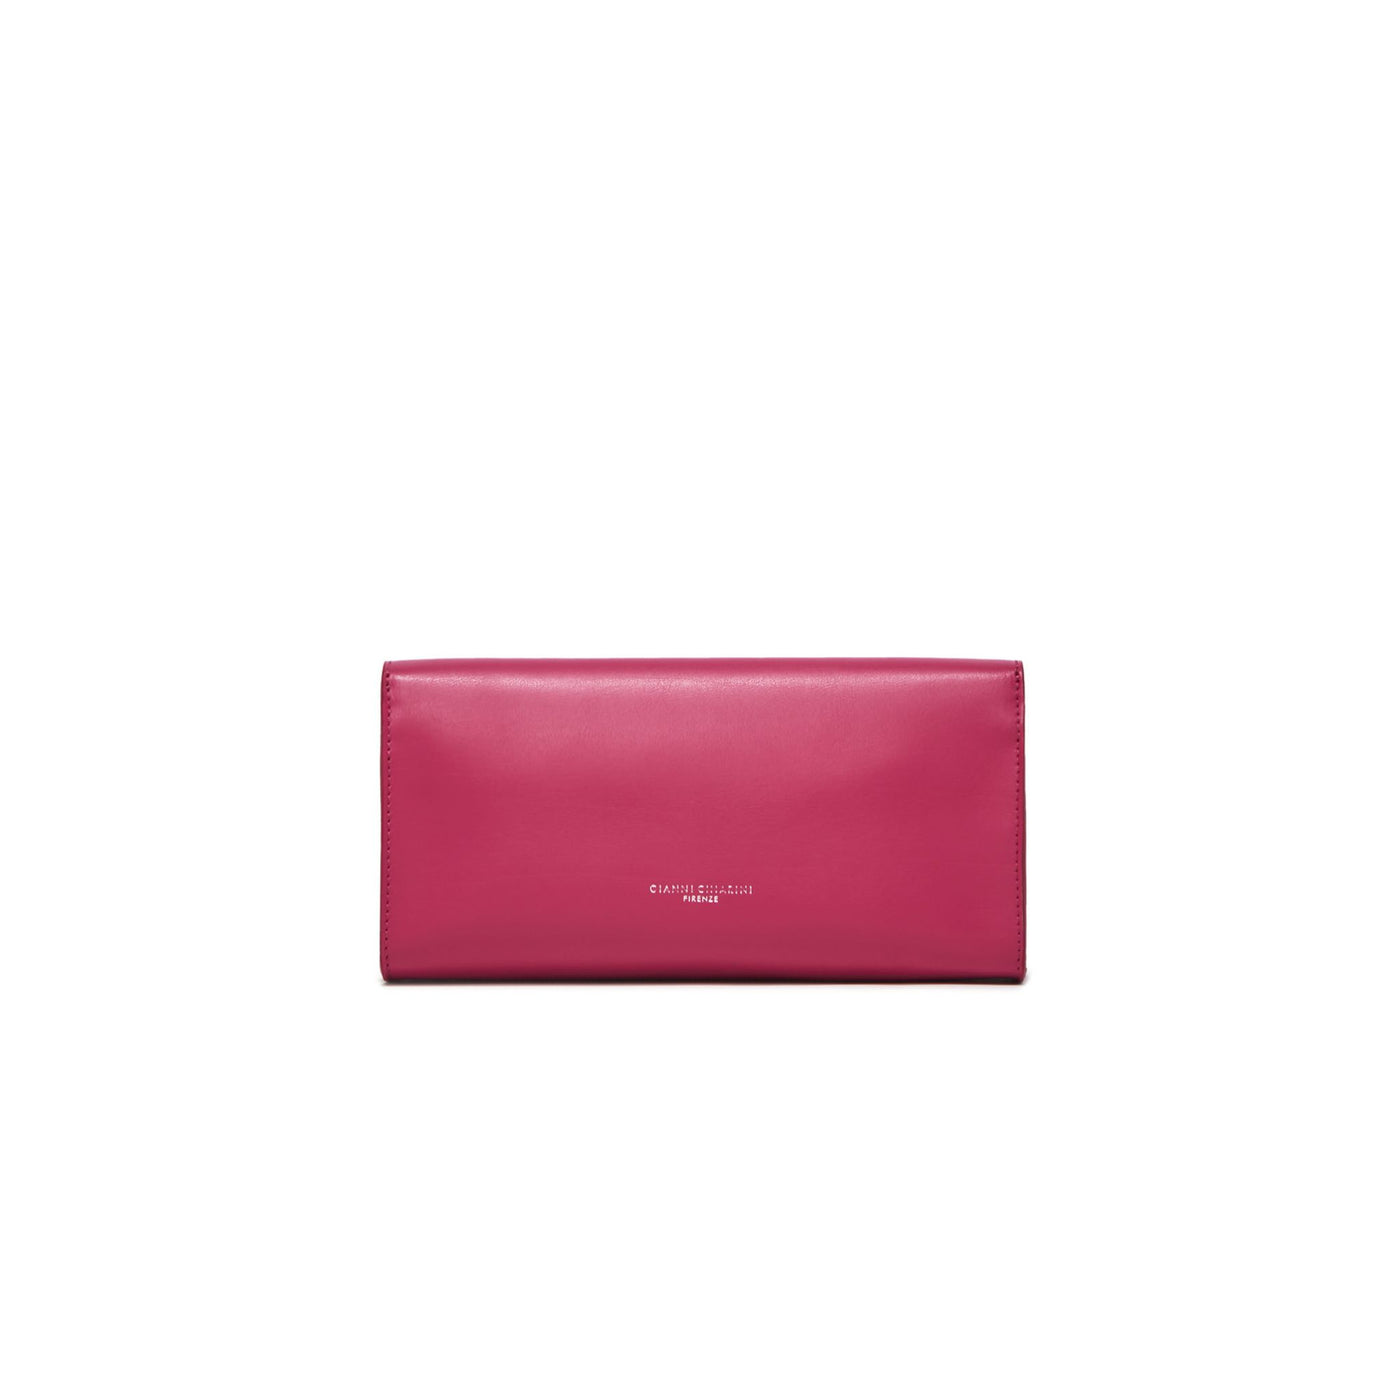 Women's pochette in smooth leather